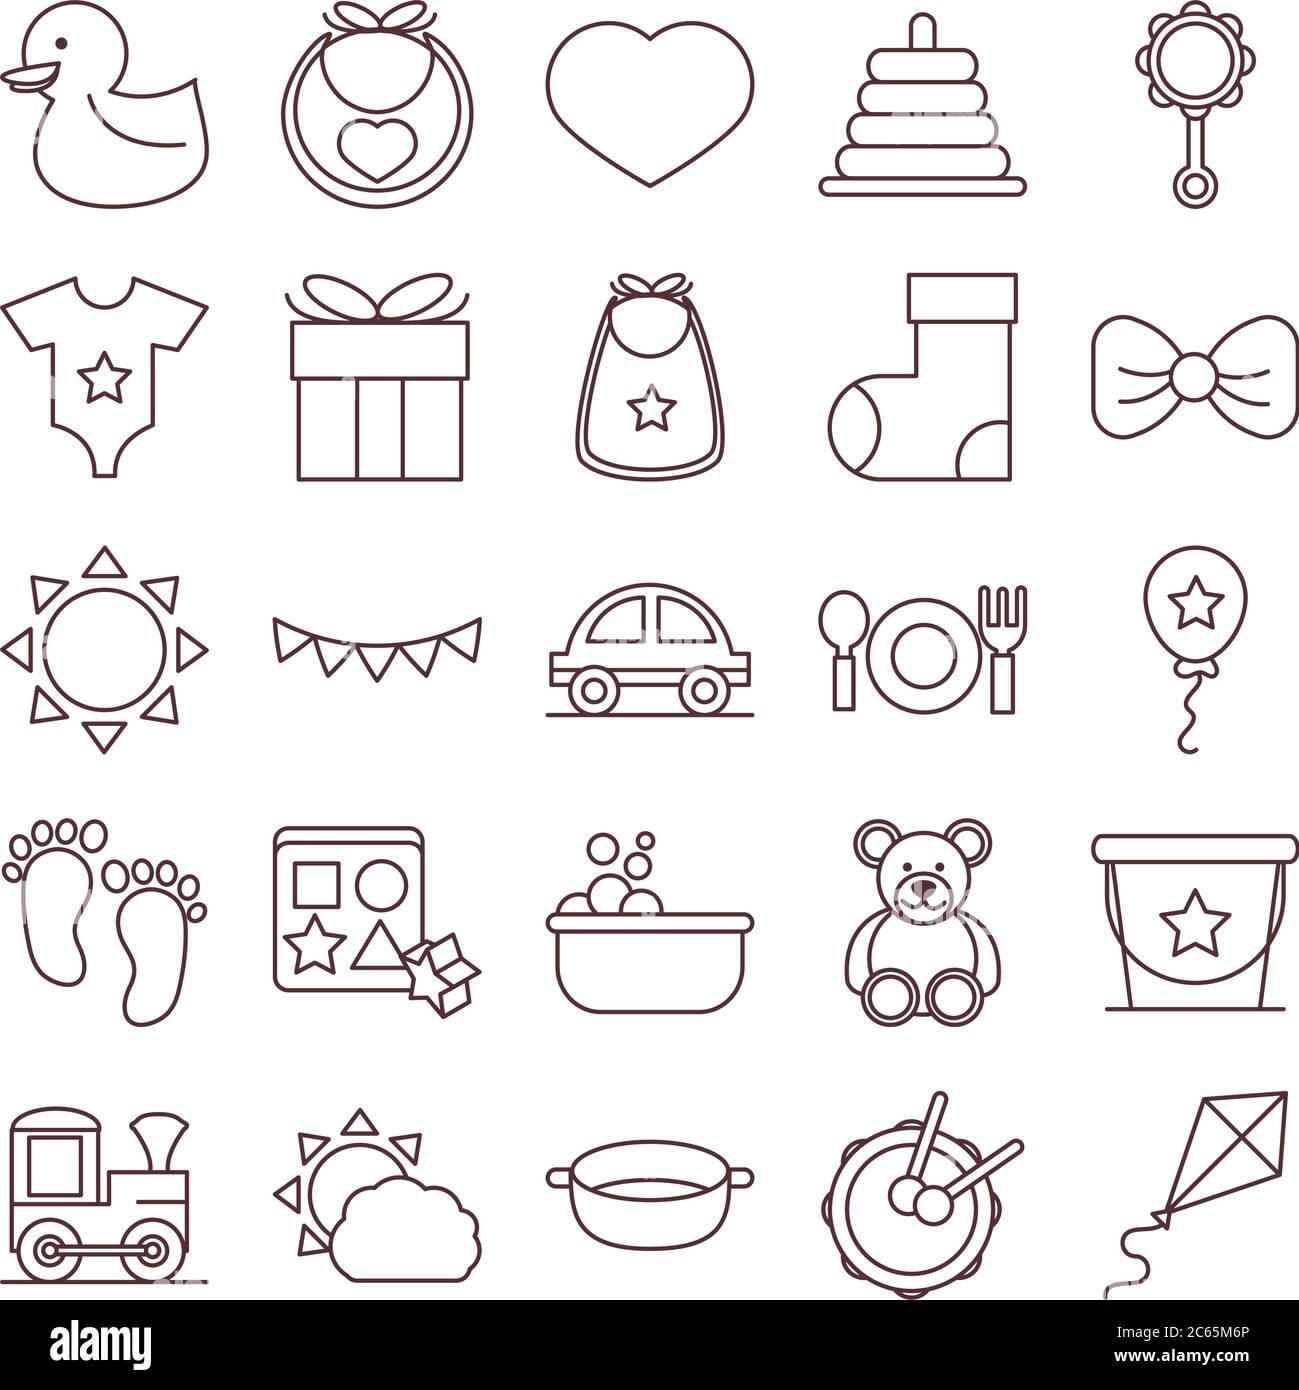 https://c8.alamy.com/comp/2C65M6P/baby-feeding-toys-and-clothes-welcome-newborn-icons-set-line-and-fill-design-vector-illustration-2C65M6P.jpg